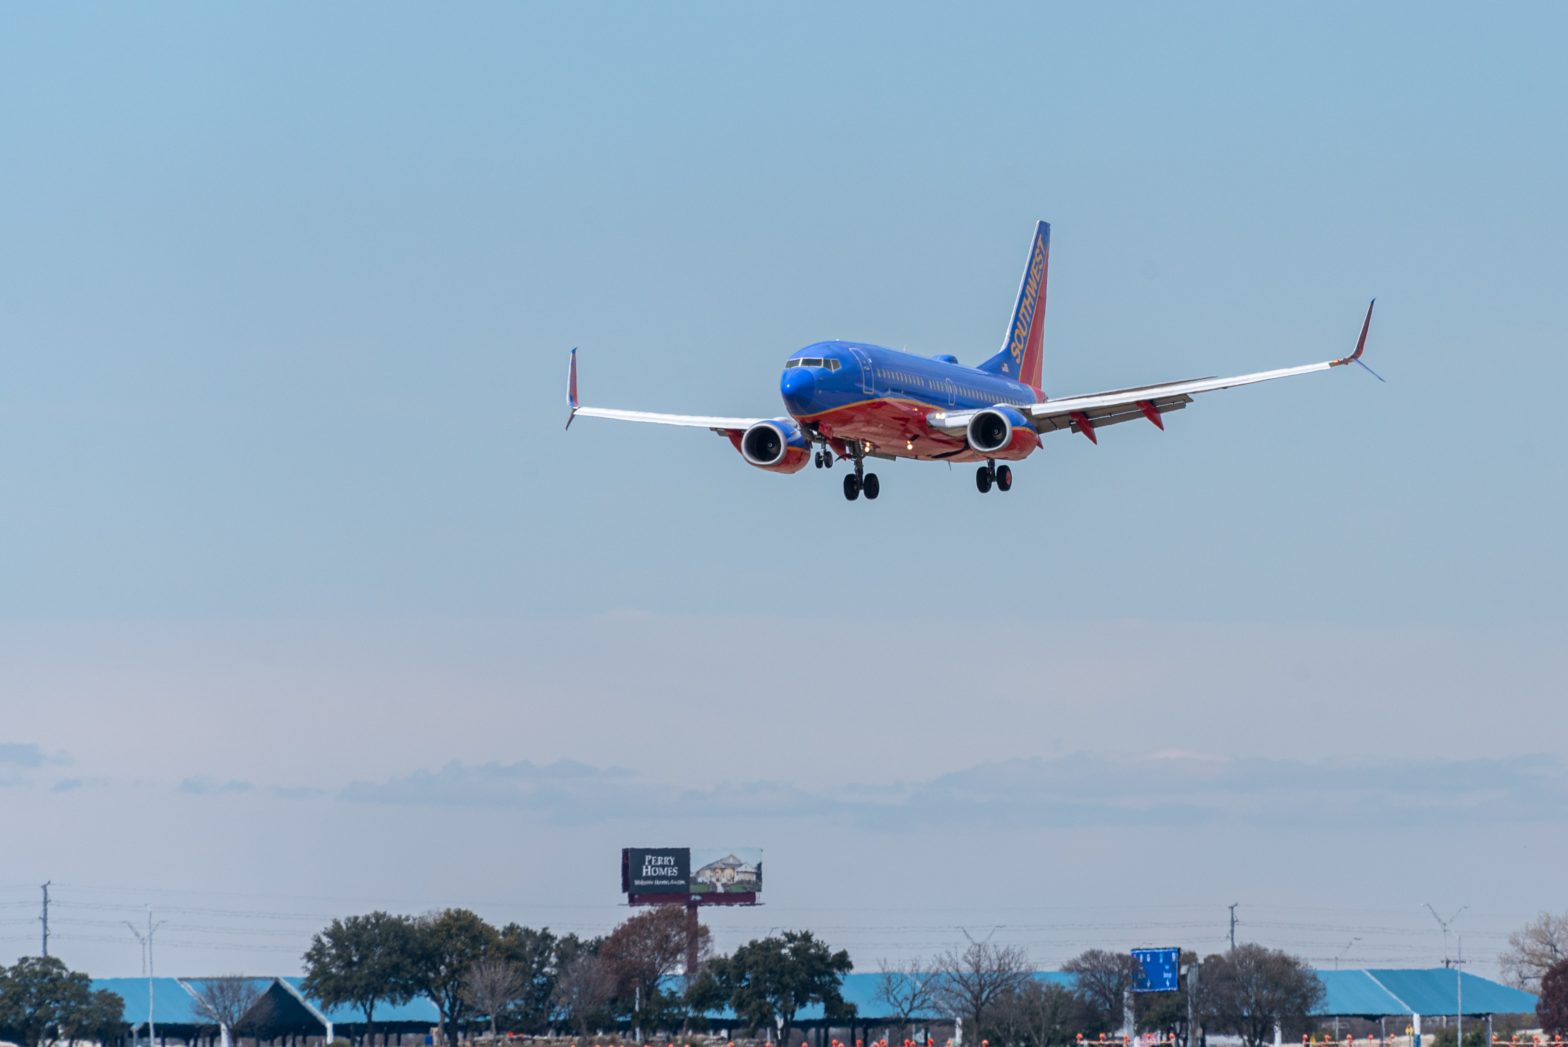 Southwest Passenger Claims 'Jesus' Told Her To Open Aircraft Door